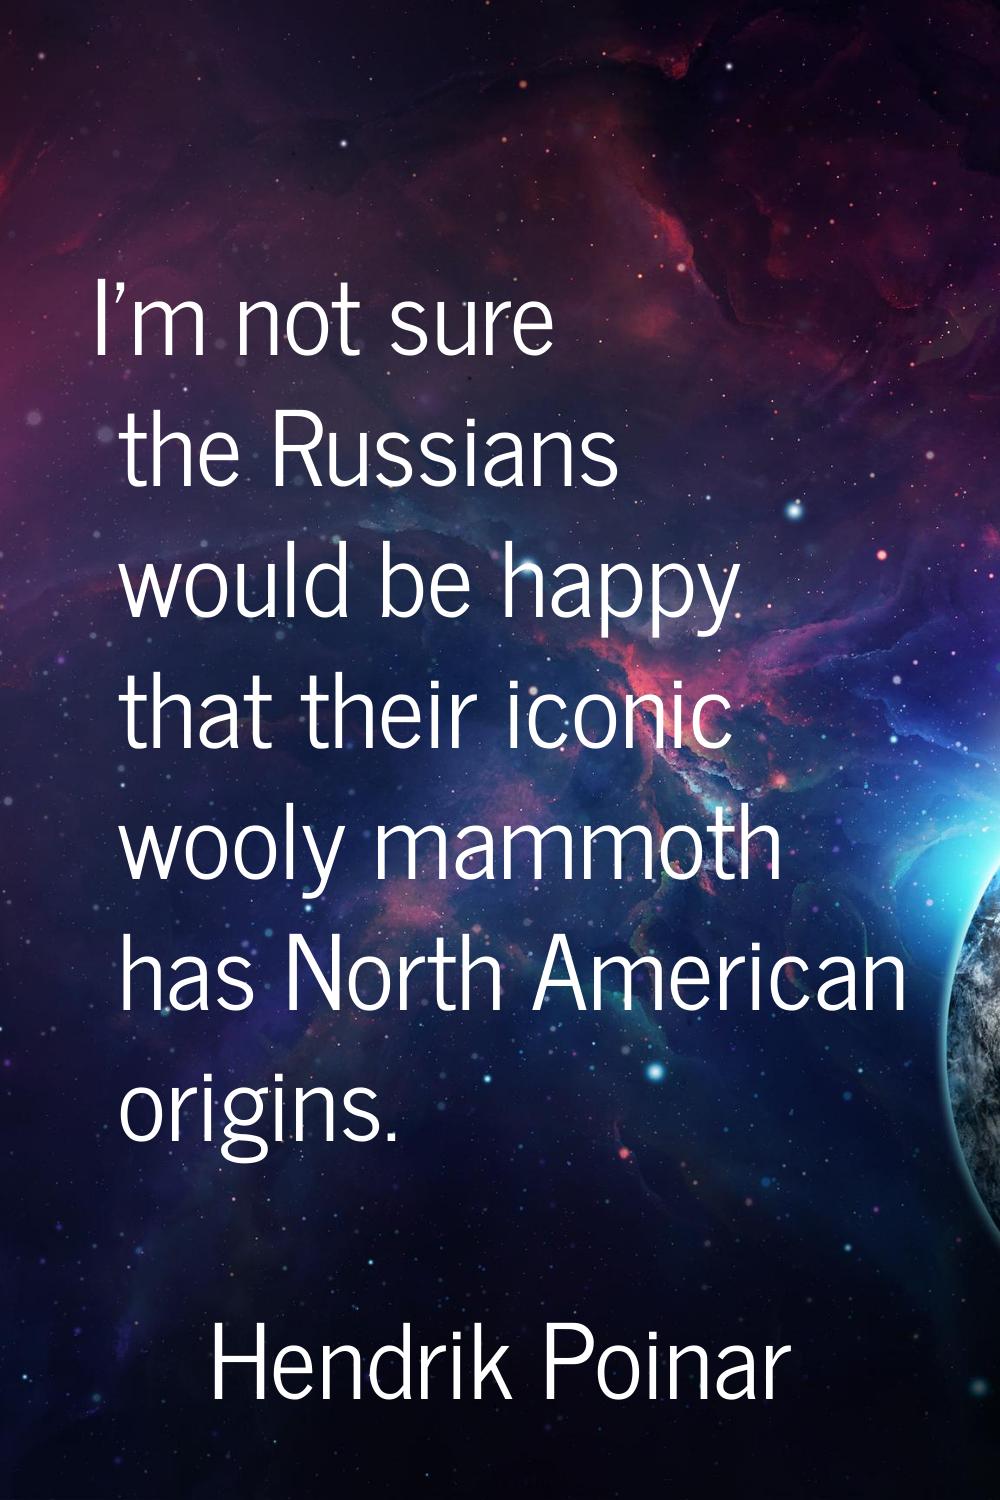 I'm not sure the Russians would be happy that their iconic wooly mammoth has North American origins